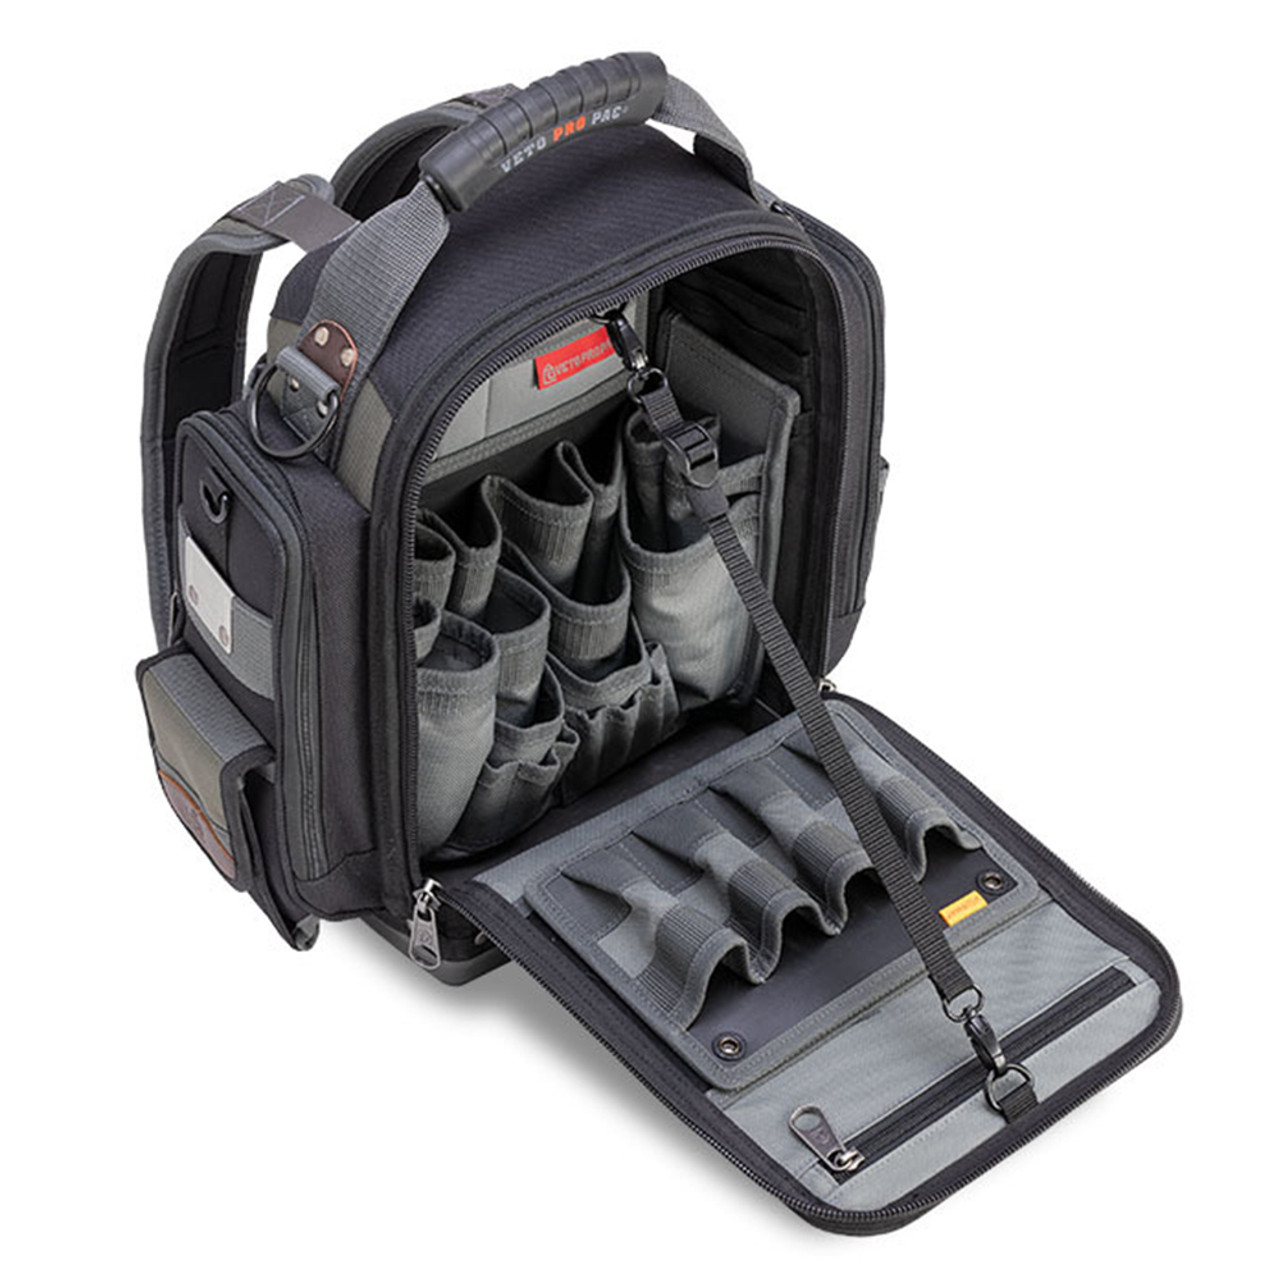 Trying out a new bag, what do you think of Veto Pro Pac? : r/electricians